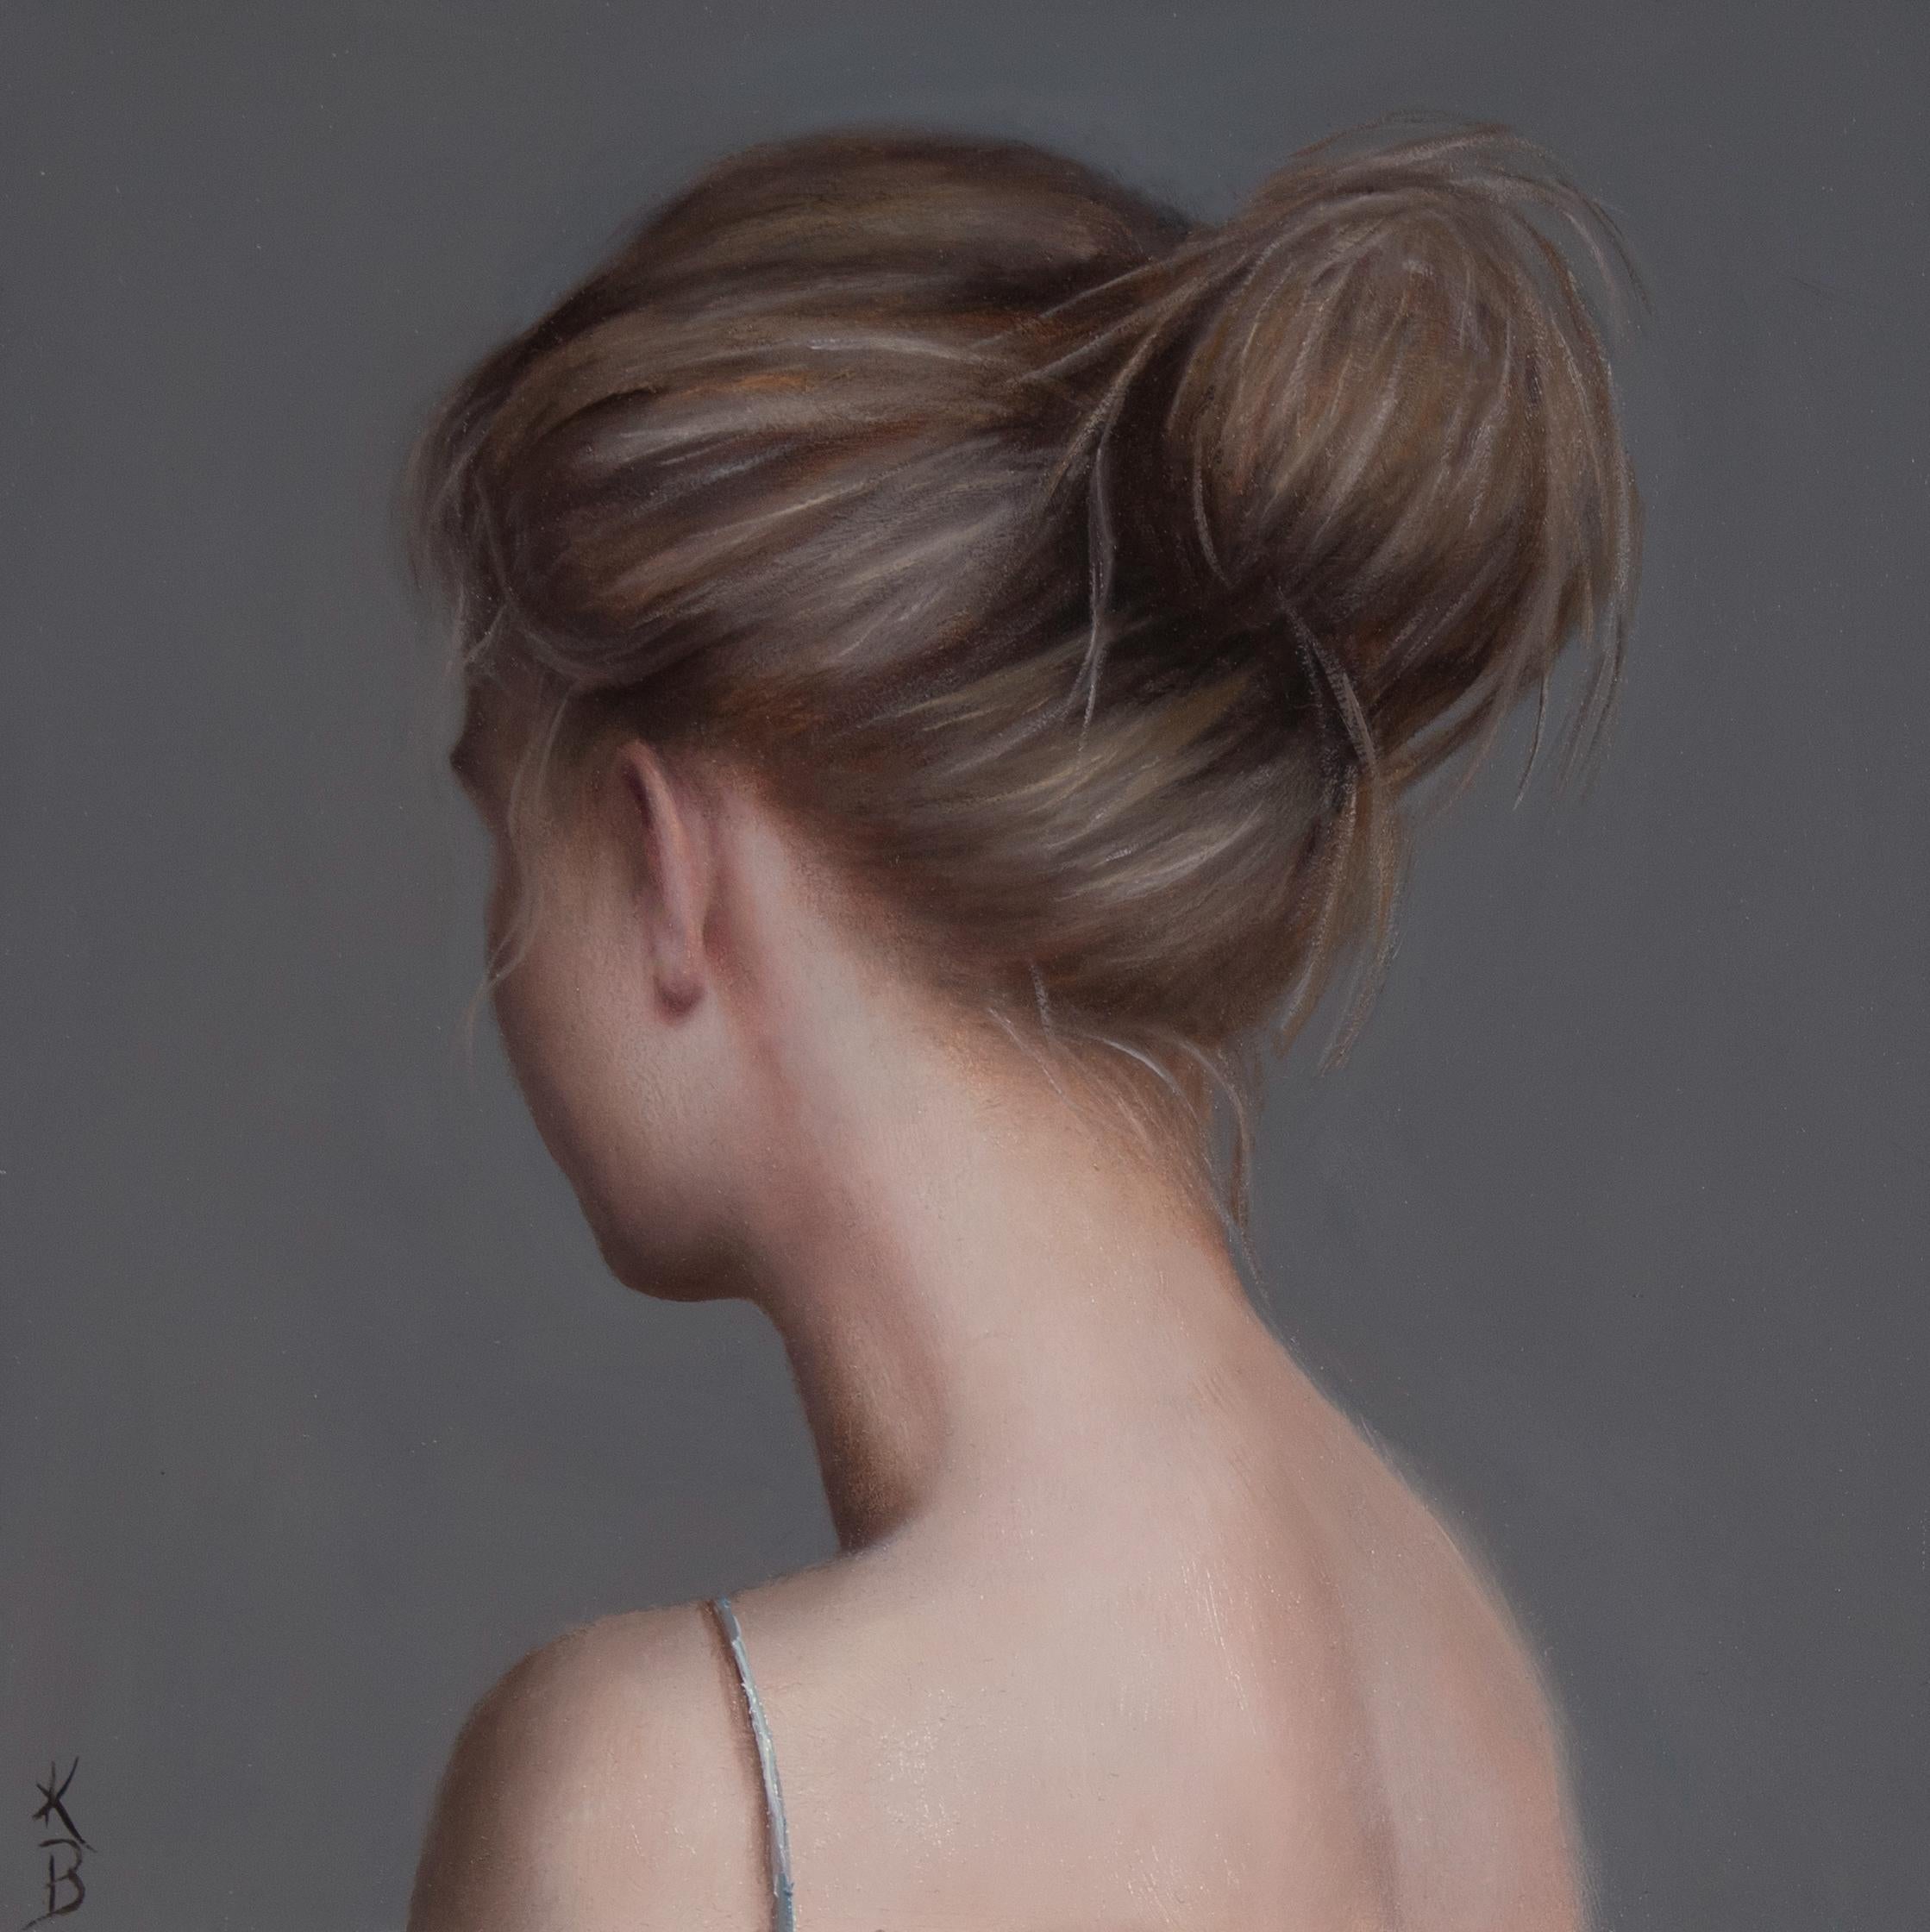 Kelly Birkenruth's "Messy Bun" (2023) is an original oil painting on panel, measuring 6 x 6 x 2 inches. This charming artwork features the back profile of a young woman with her hair styled in a casual, messy bun. The soft, muted background